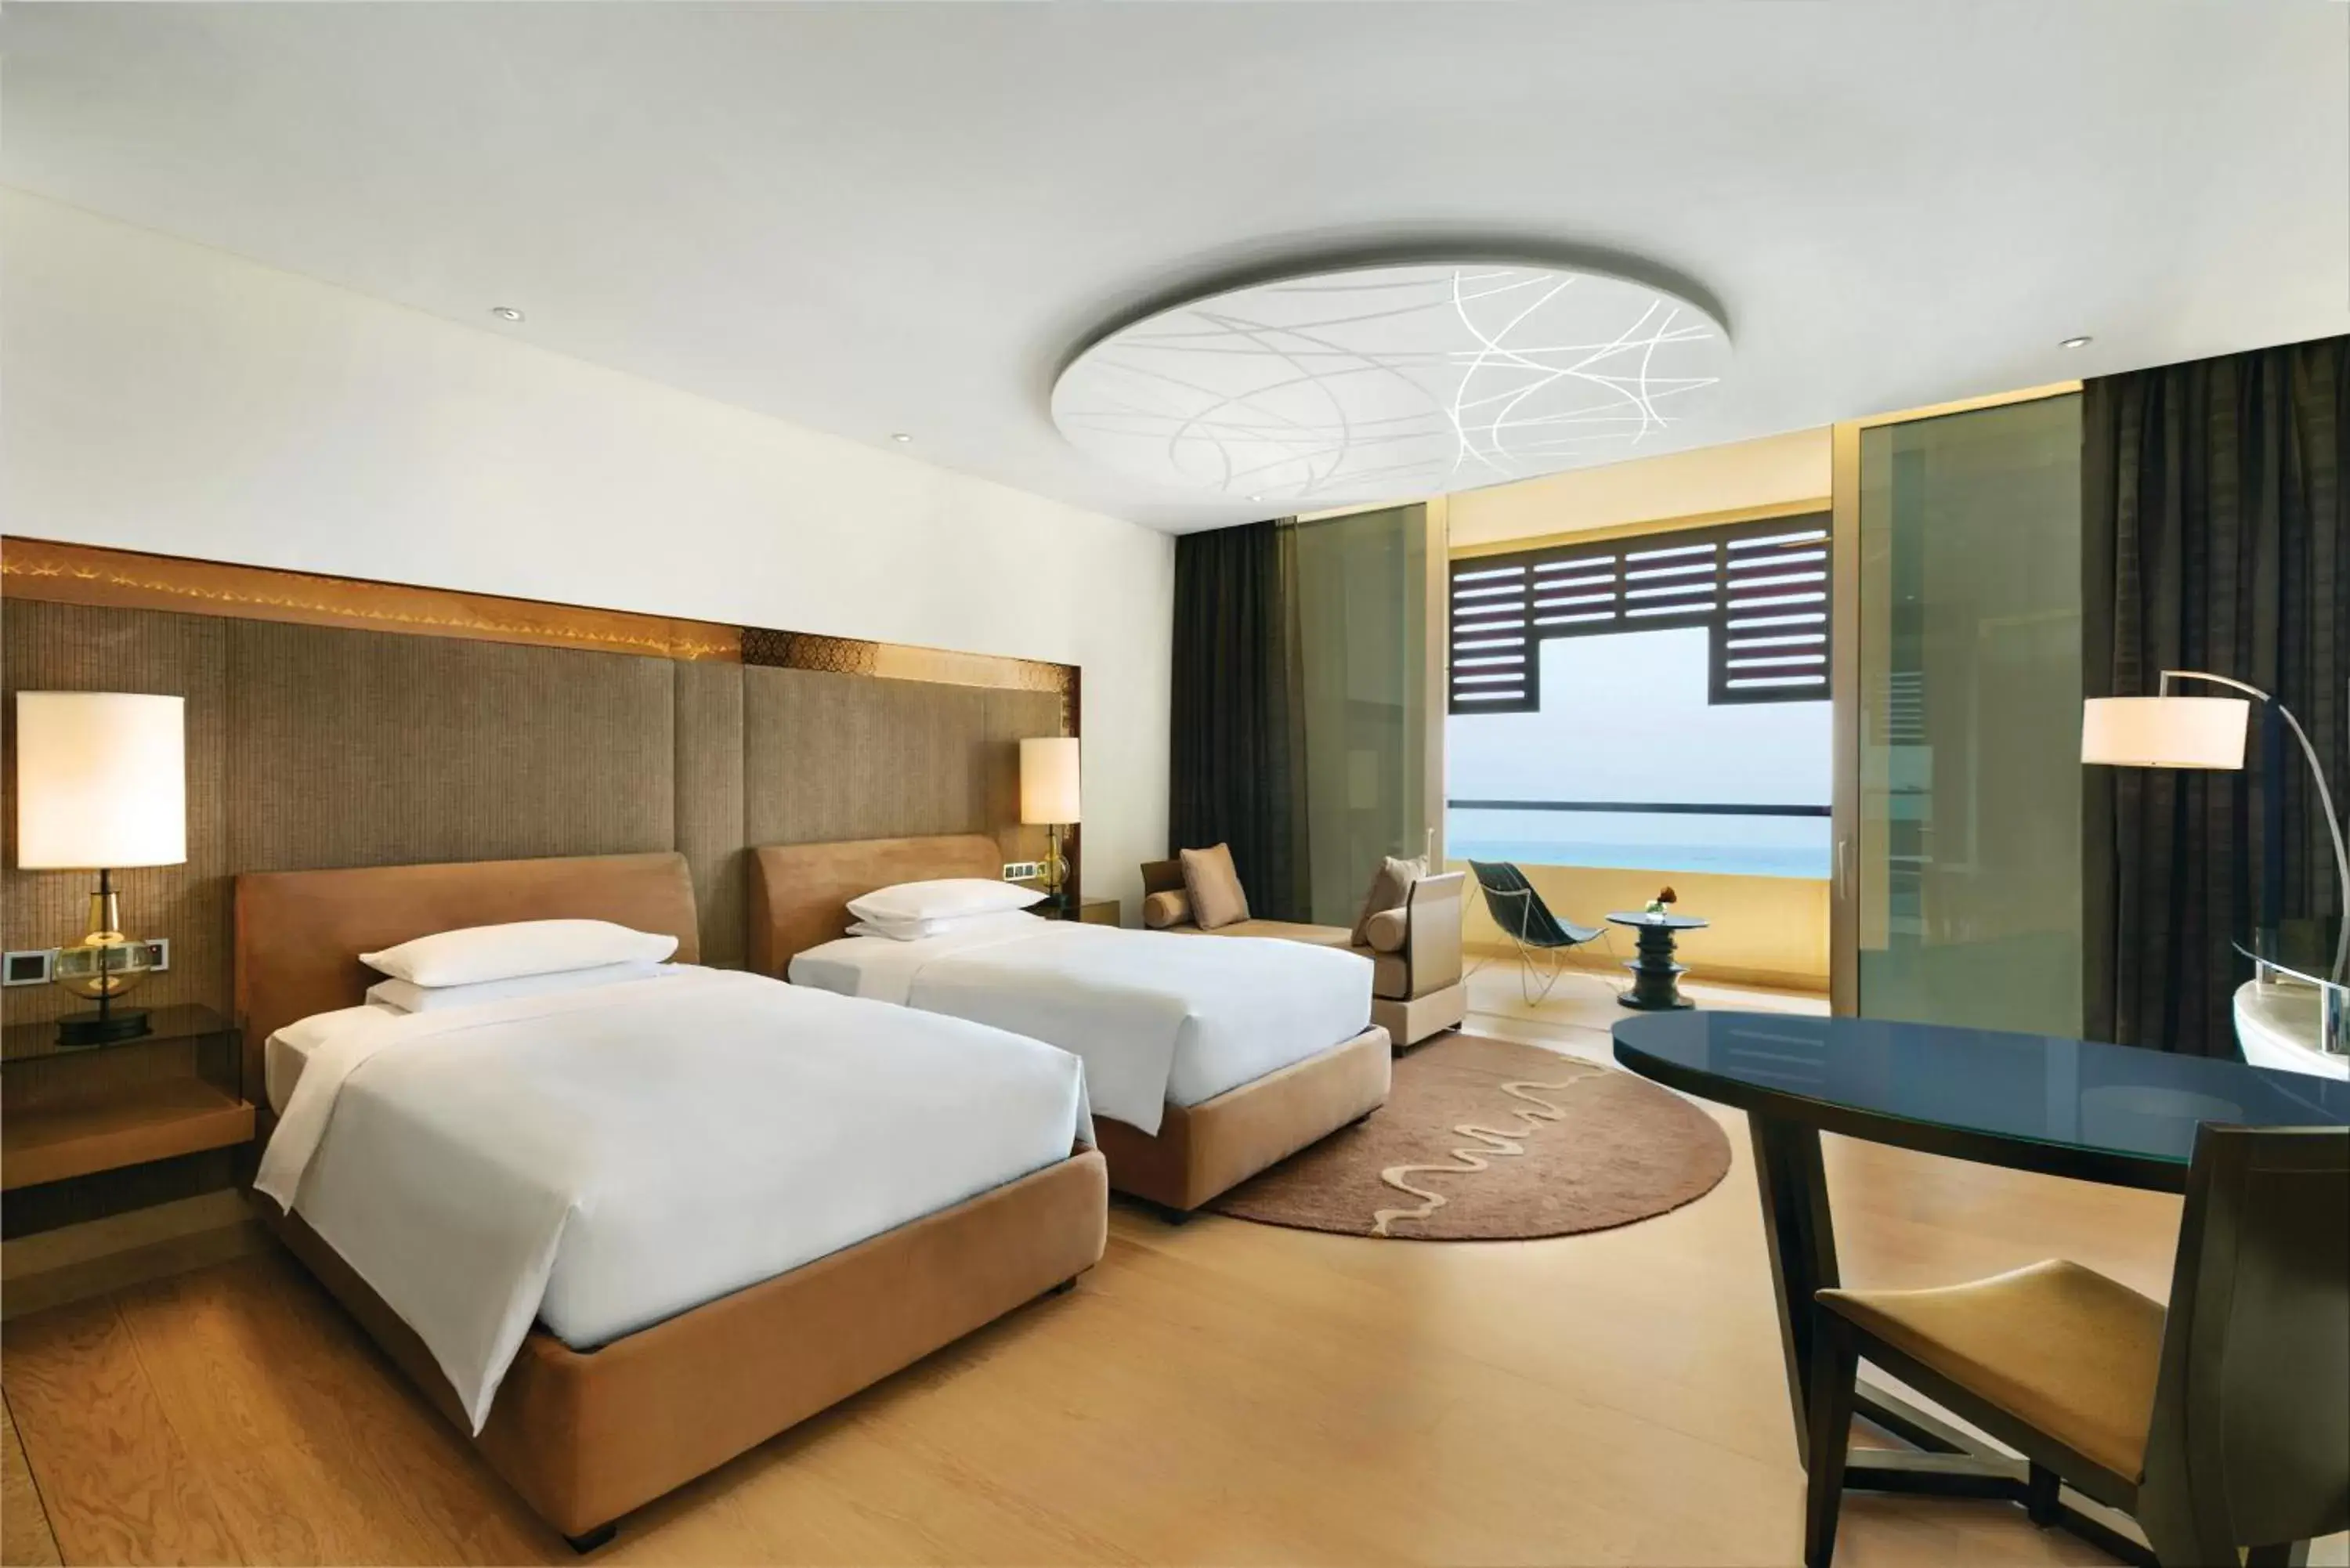 Twin Room with Sea View in Park Hyatt Abu Dhabi Hotel and Villas